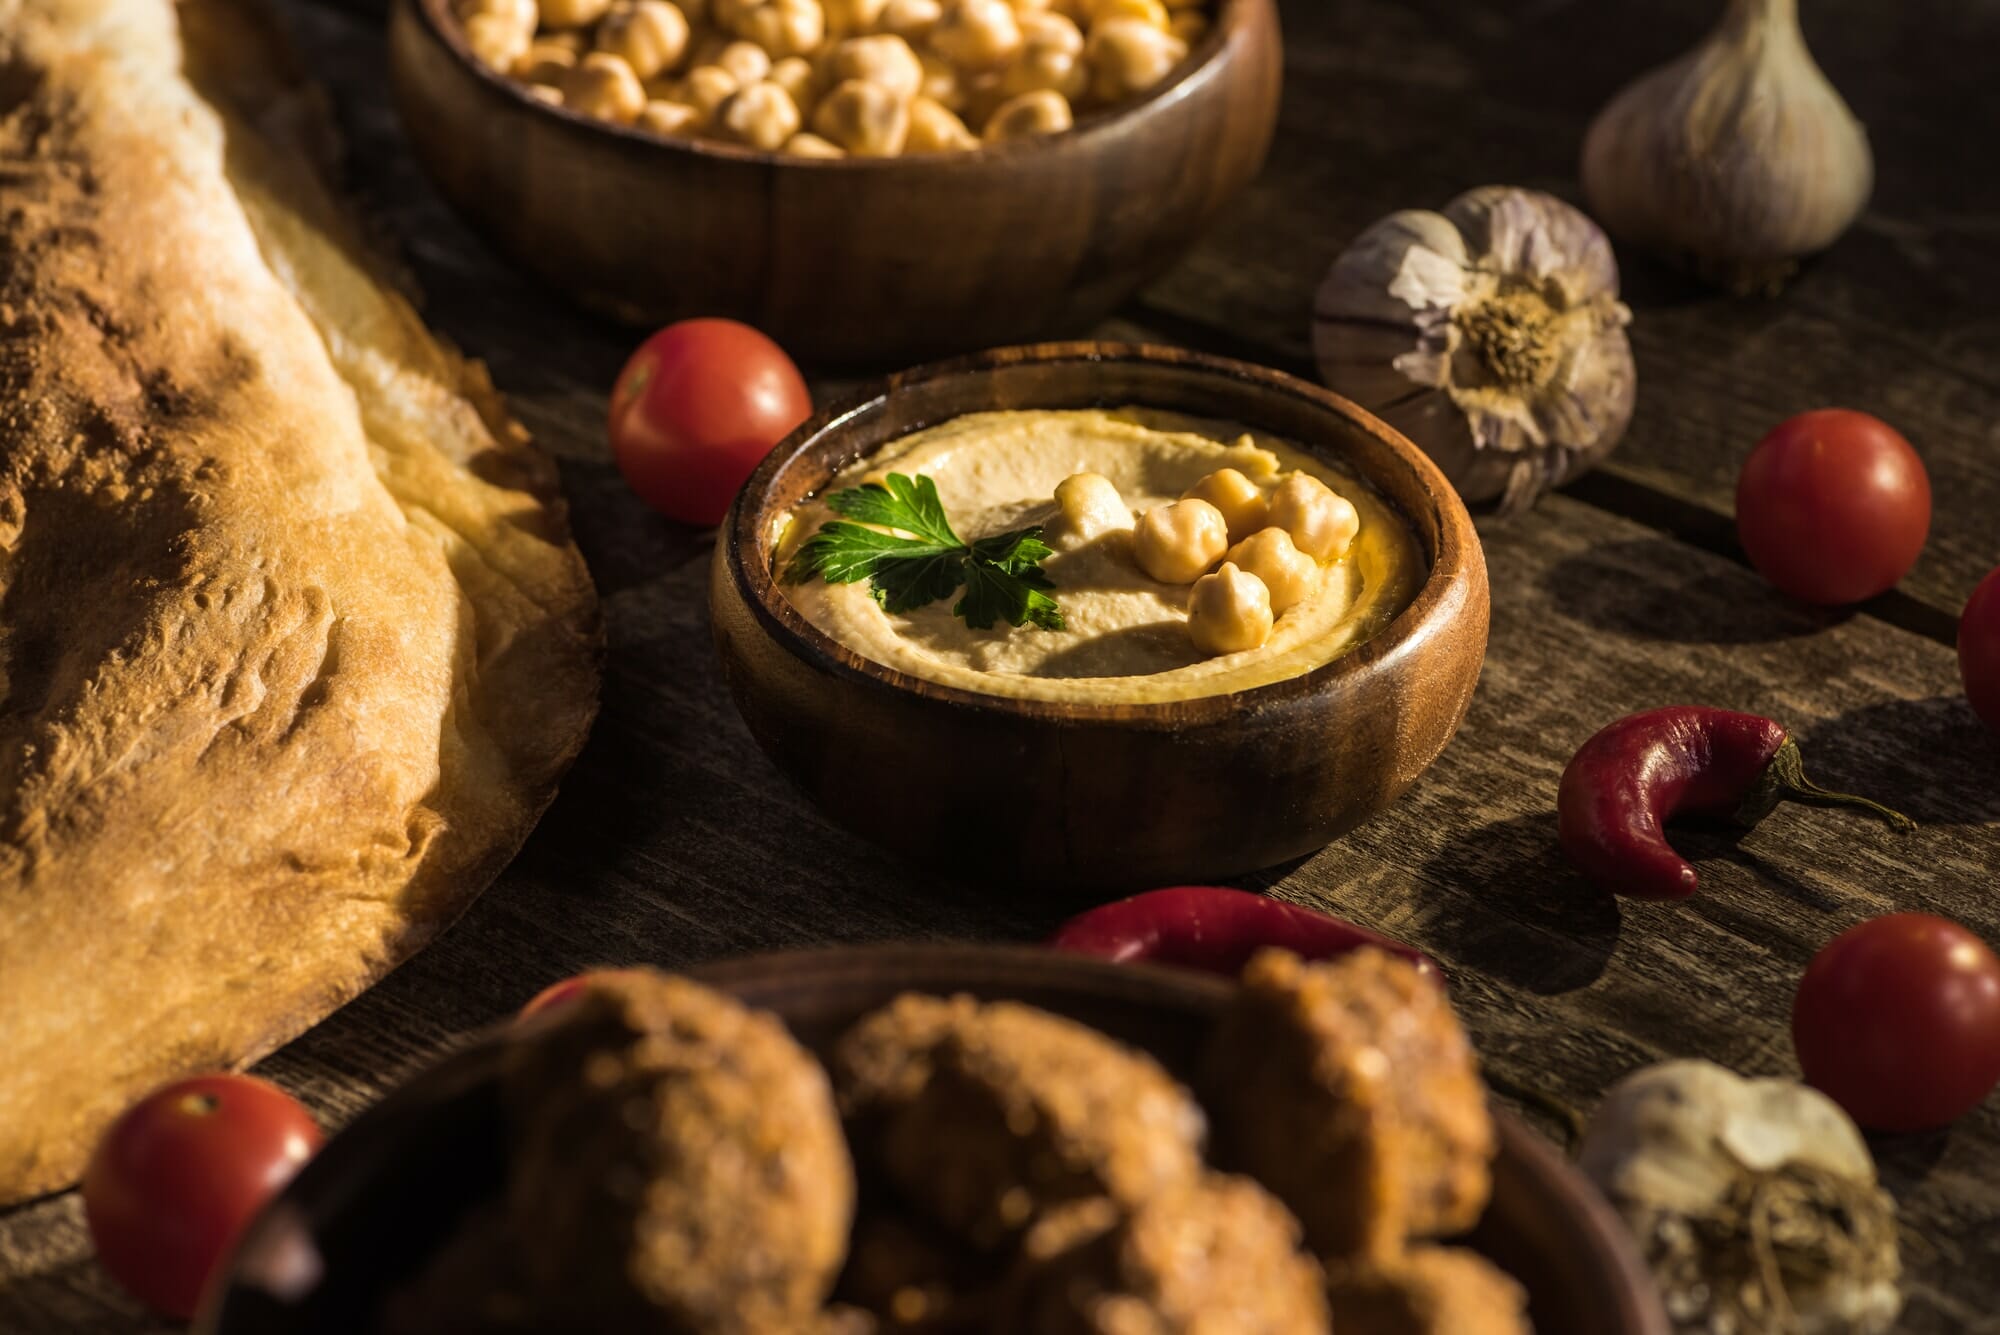 Falafel and delicious hummus, chickpeas, pita, vegetables and spices